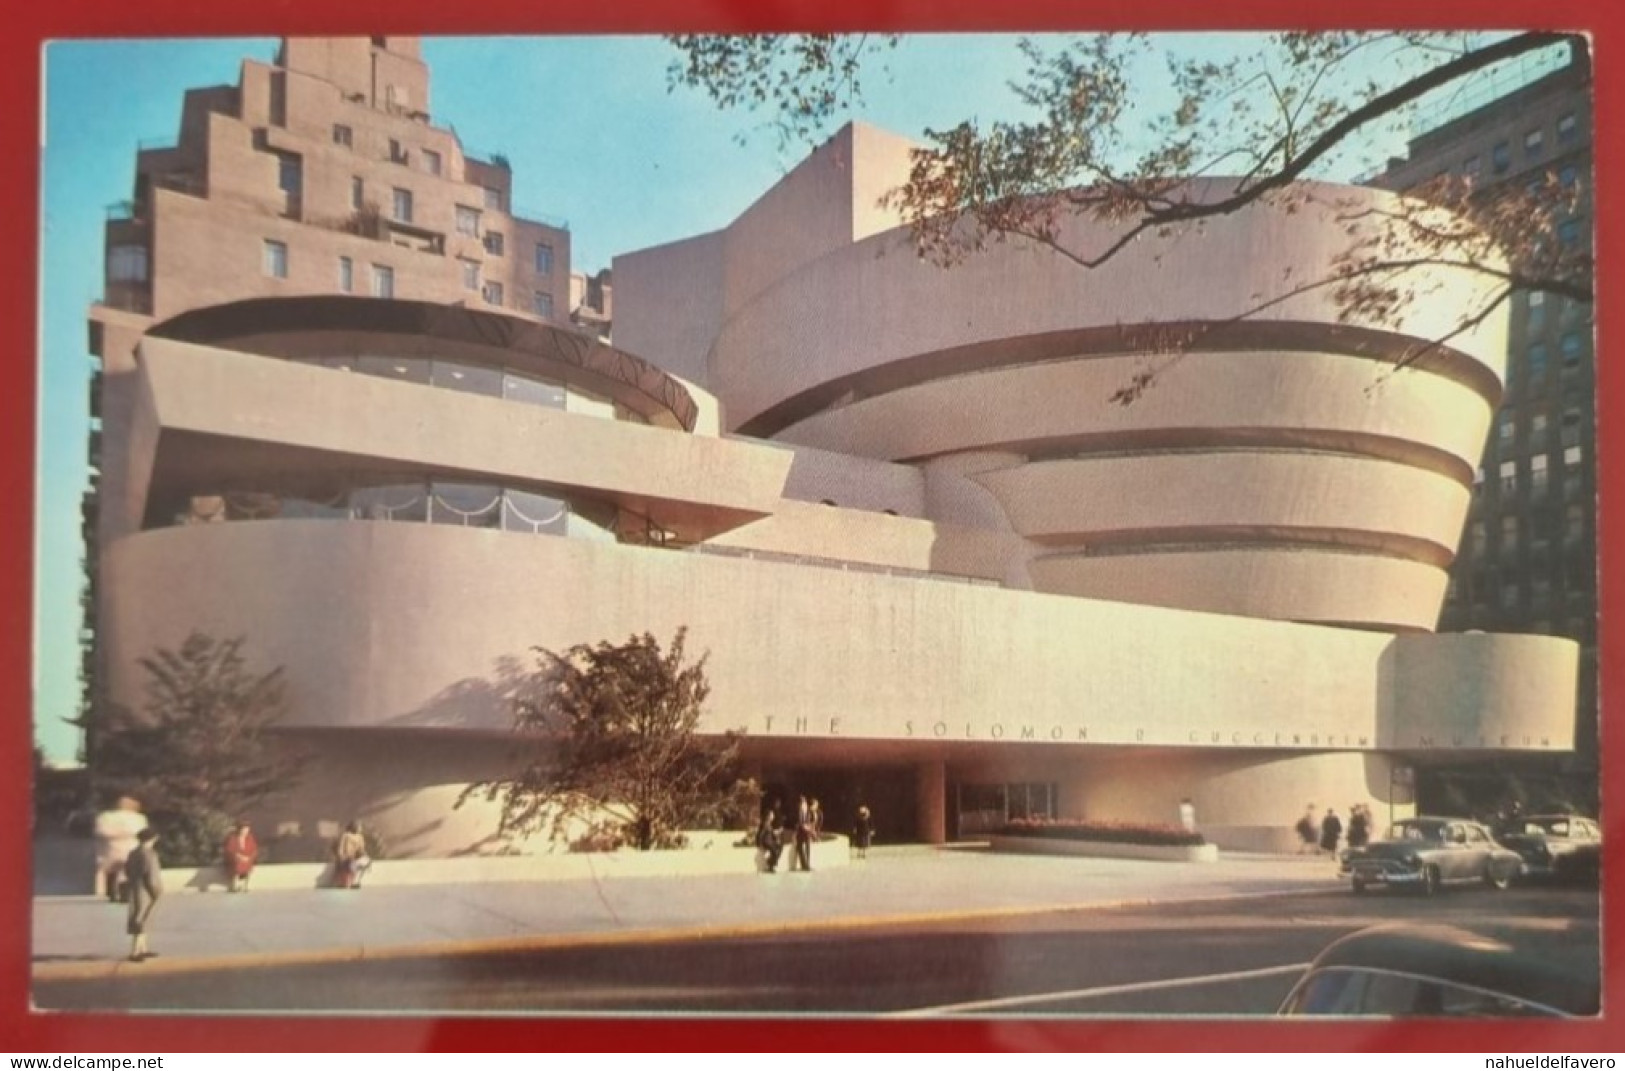 Uncirculated Postcard - USA - NY, NEW YORK CITY - THE SOLOMAN R. GUGGENHEIM MUSEUM - Museos